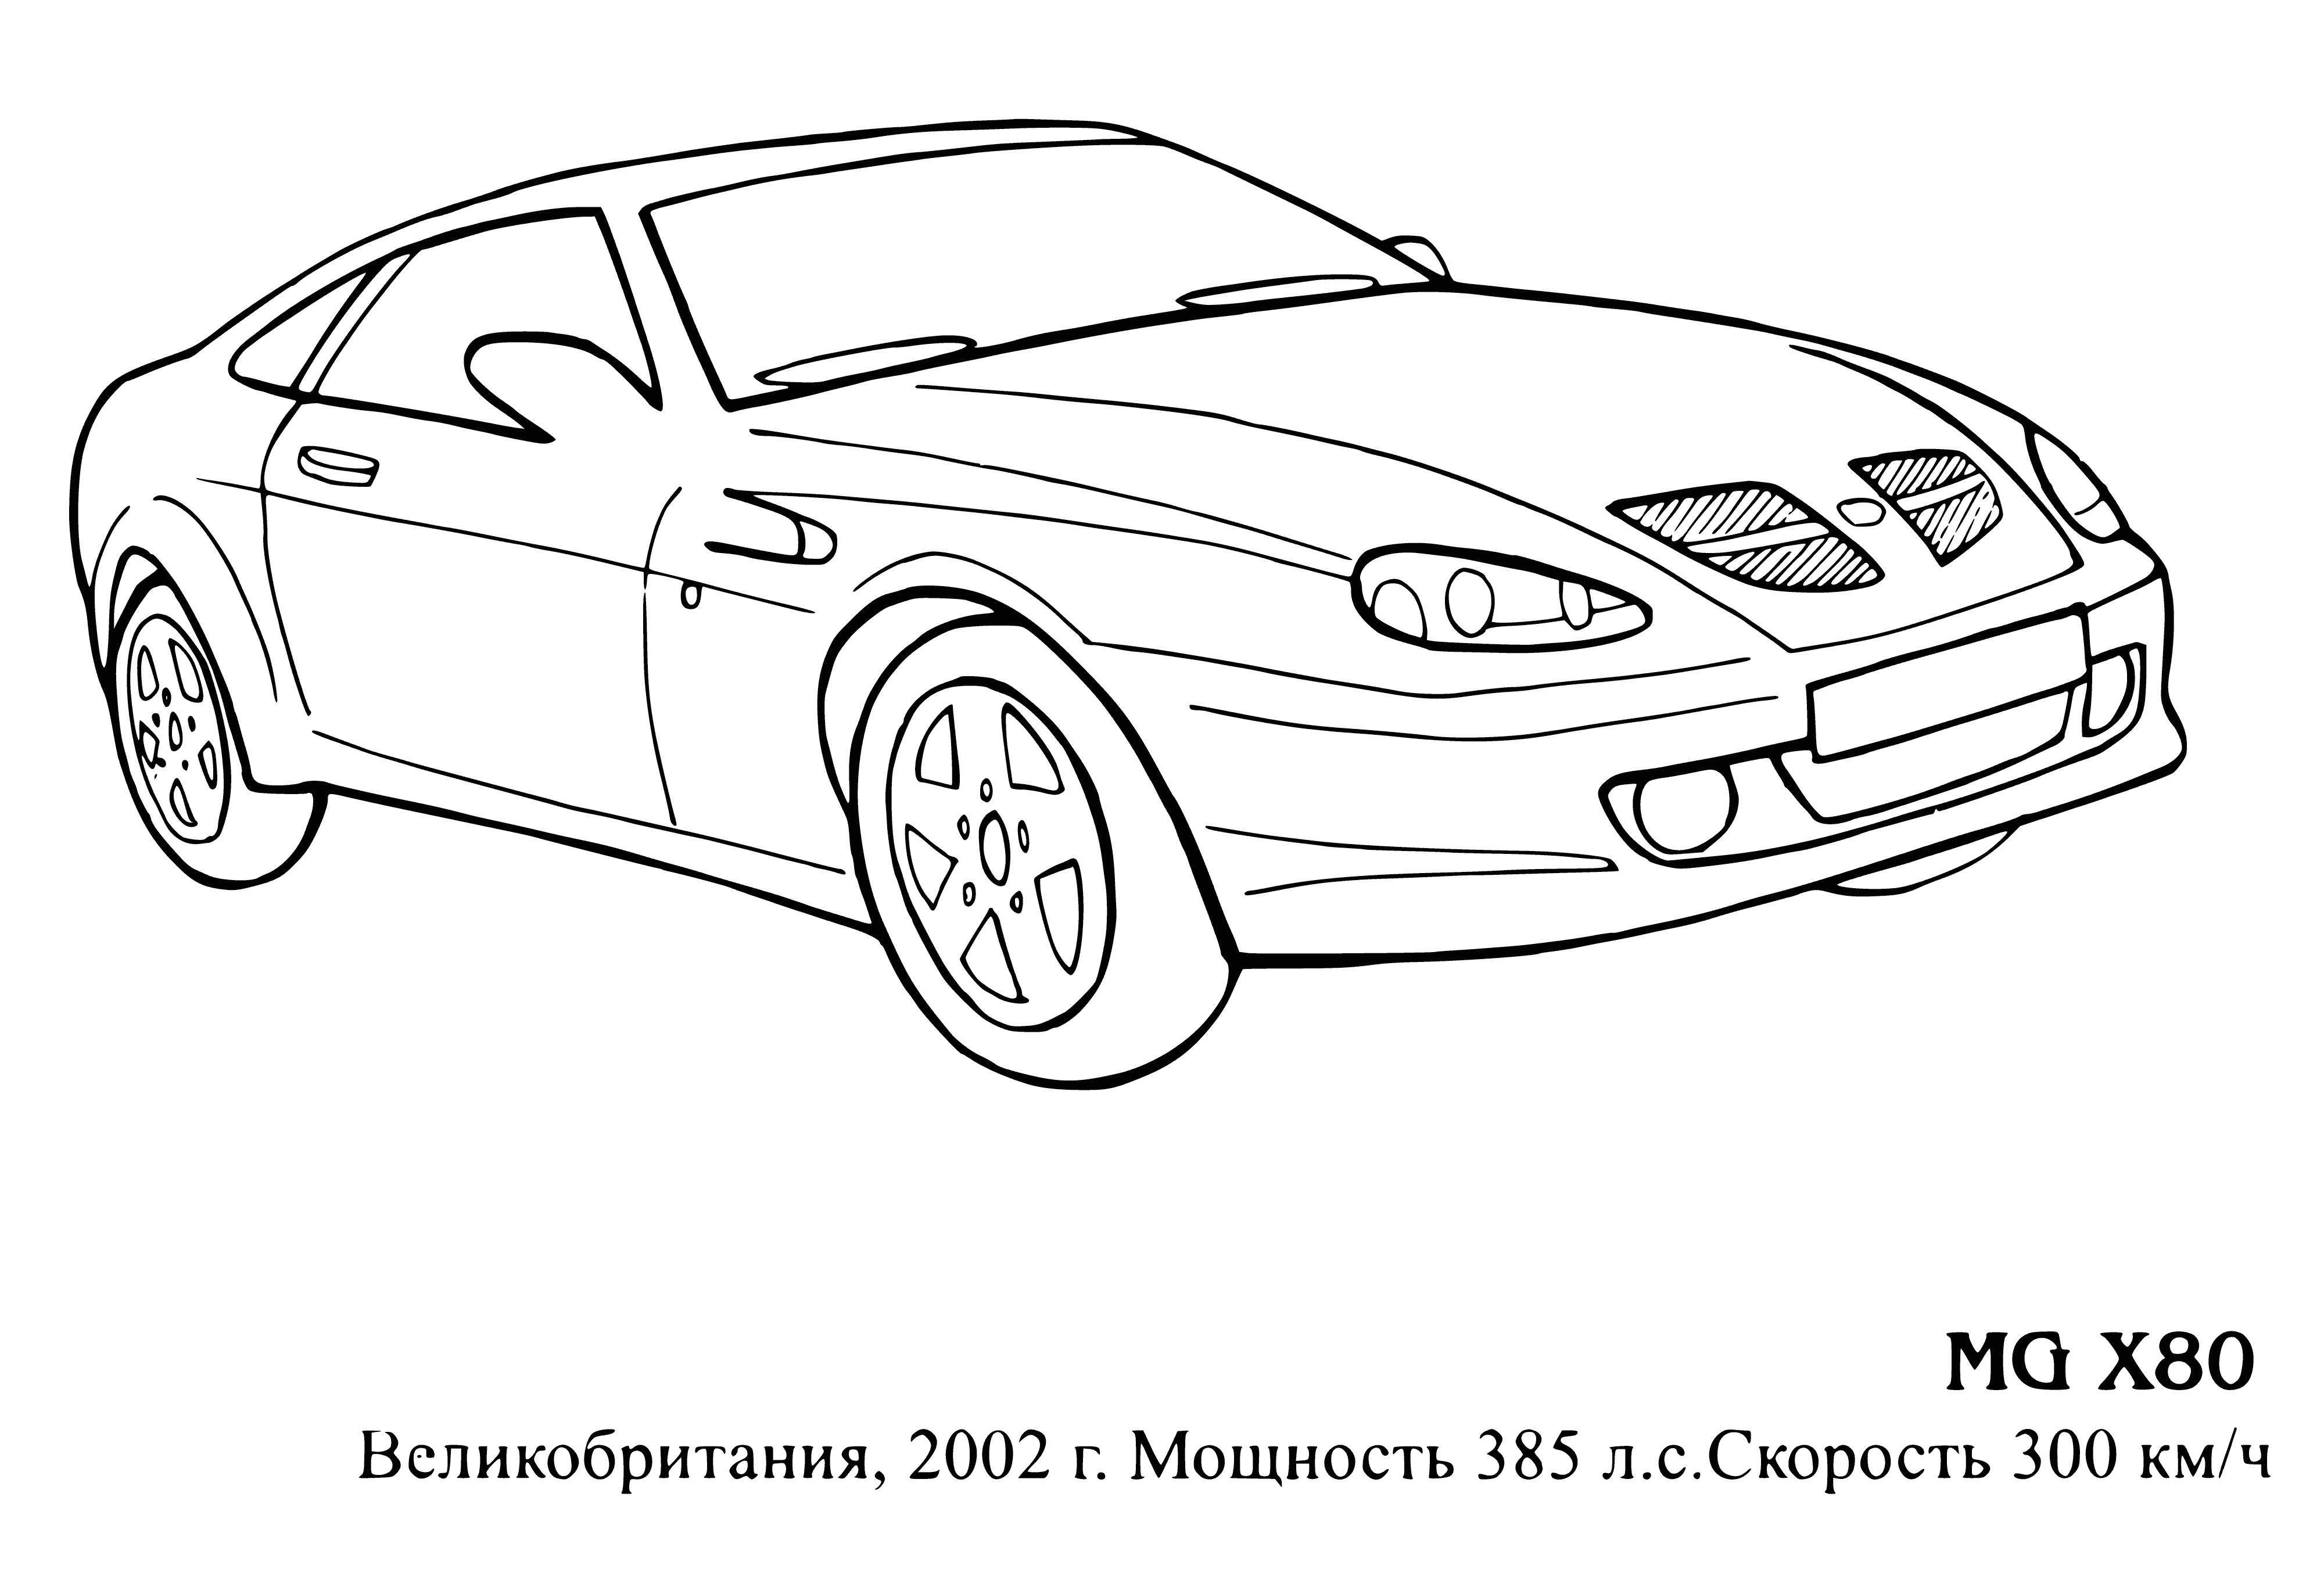 coloring page: Coloring page of man driving silver MG X80 with black trim and 4 doors, 5 seats and woman in passenger seat. #funevnting #coloringpage